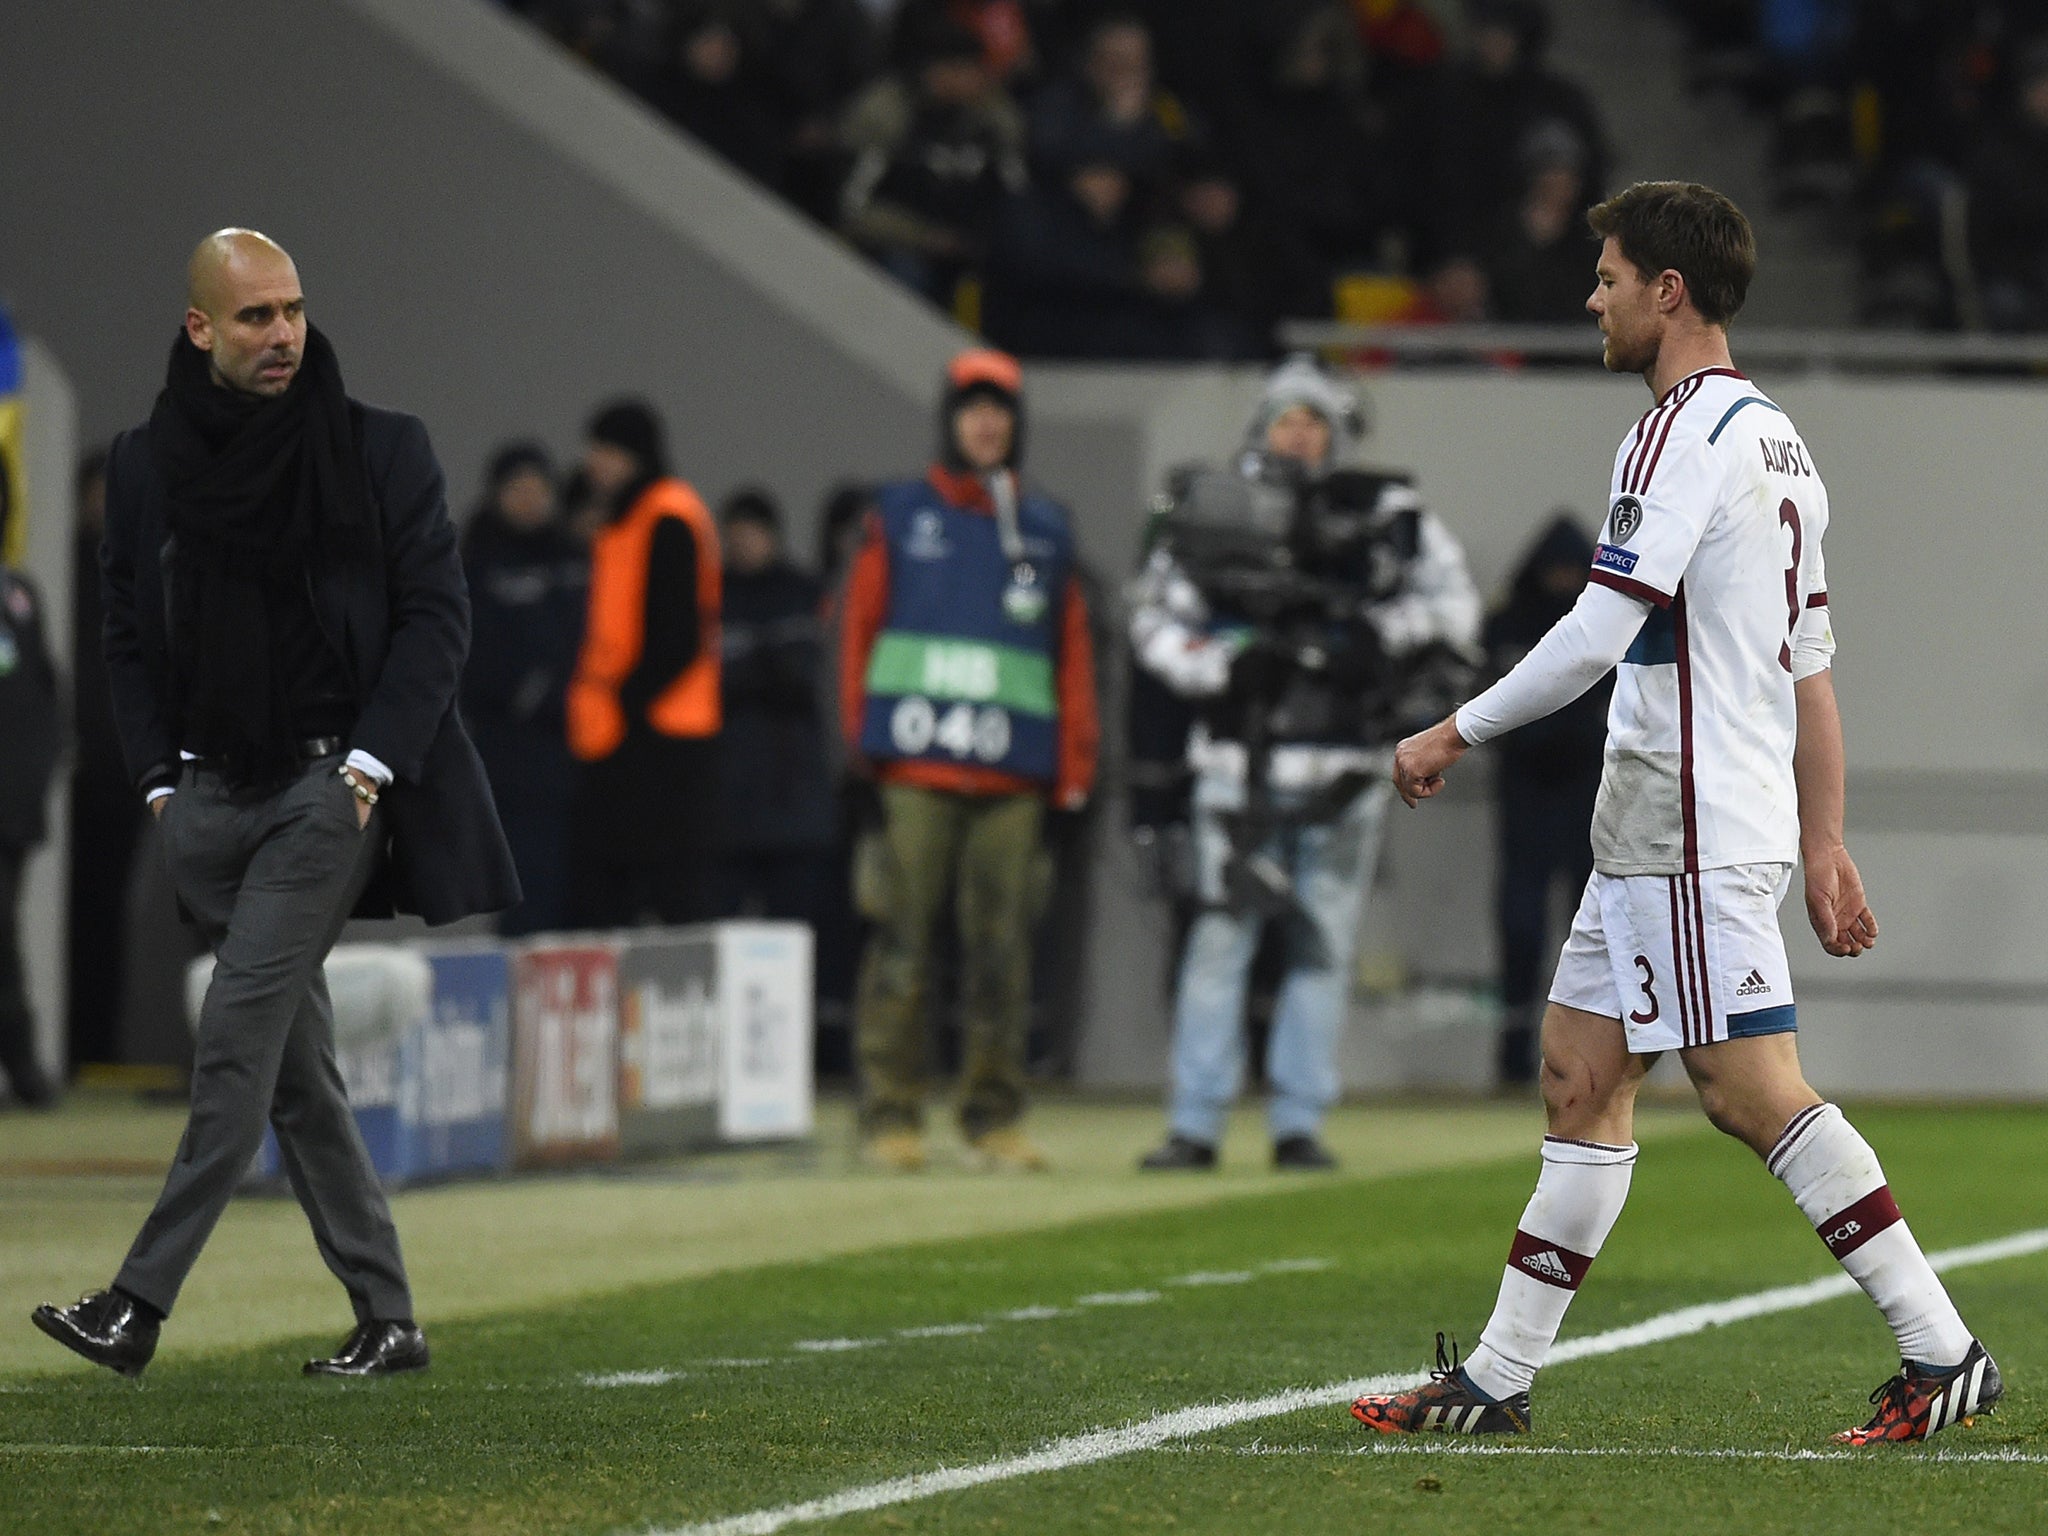 Bayern Munich's Spanish midfielder Xabi Alonso leaves the pitch after being shown a red card